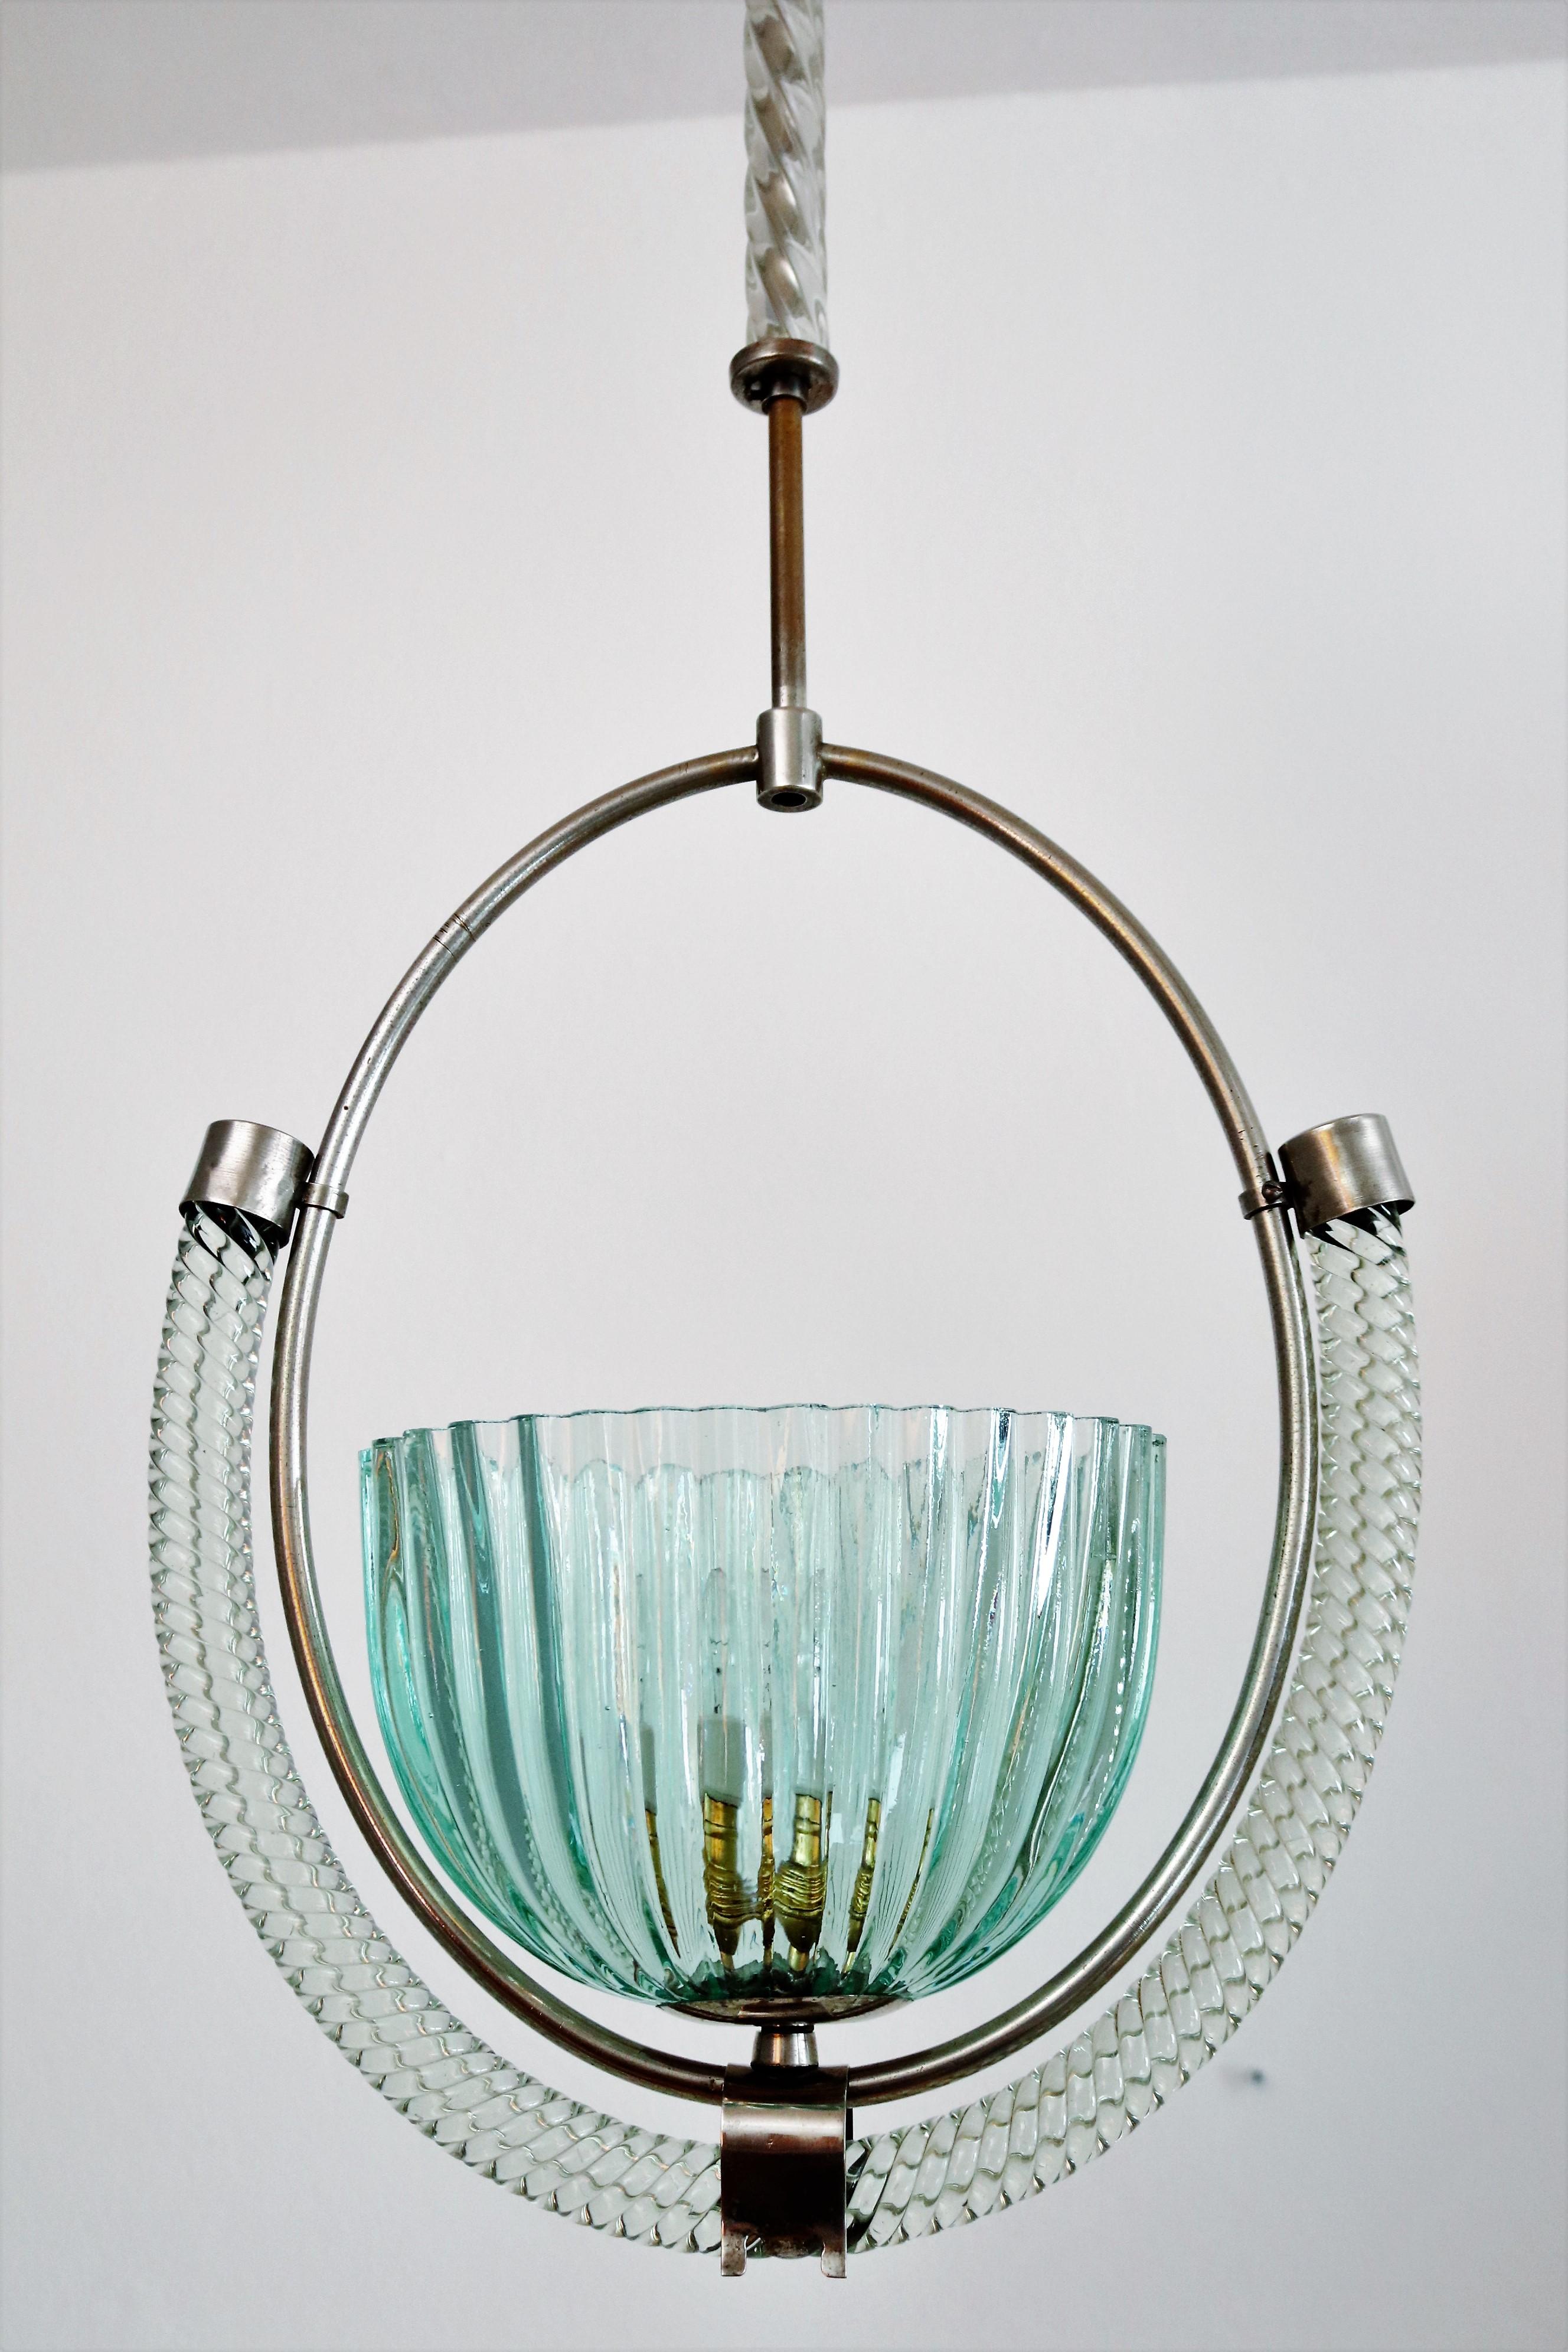 Gorgeous and rare Italian pendant made of light green and transparent colored Murano glass.
The glass parts are handmade and are of highest craftsmanship.
The lamp's frame is made entirely of chromed brass parts.
The pendant light have been newly